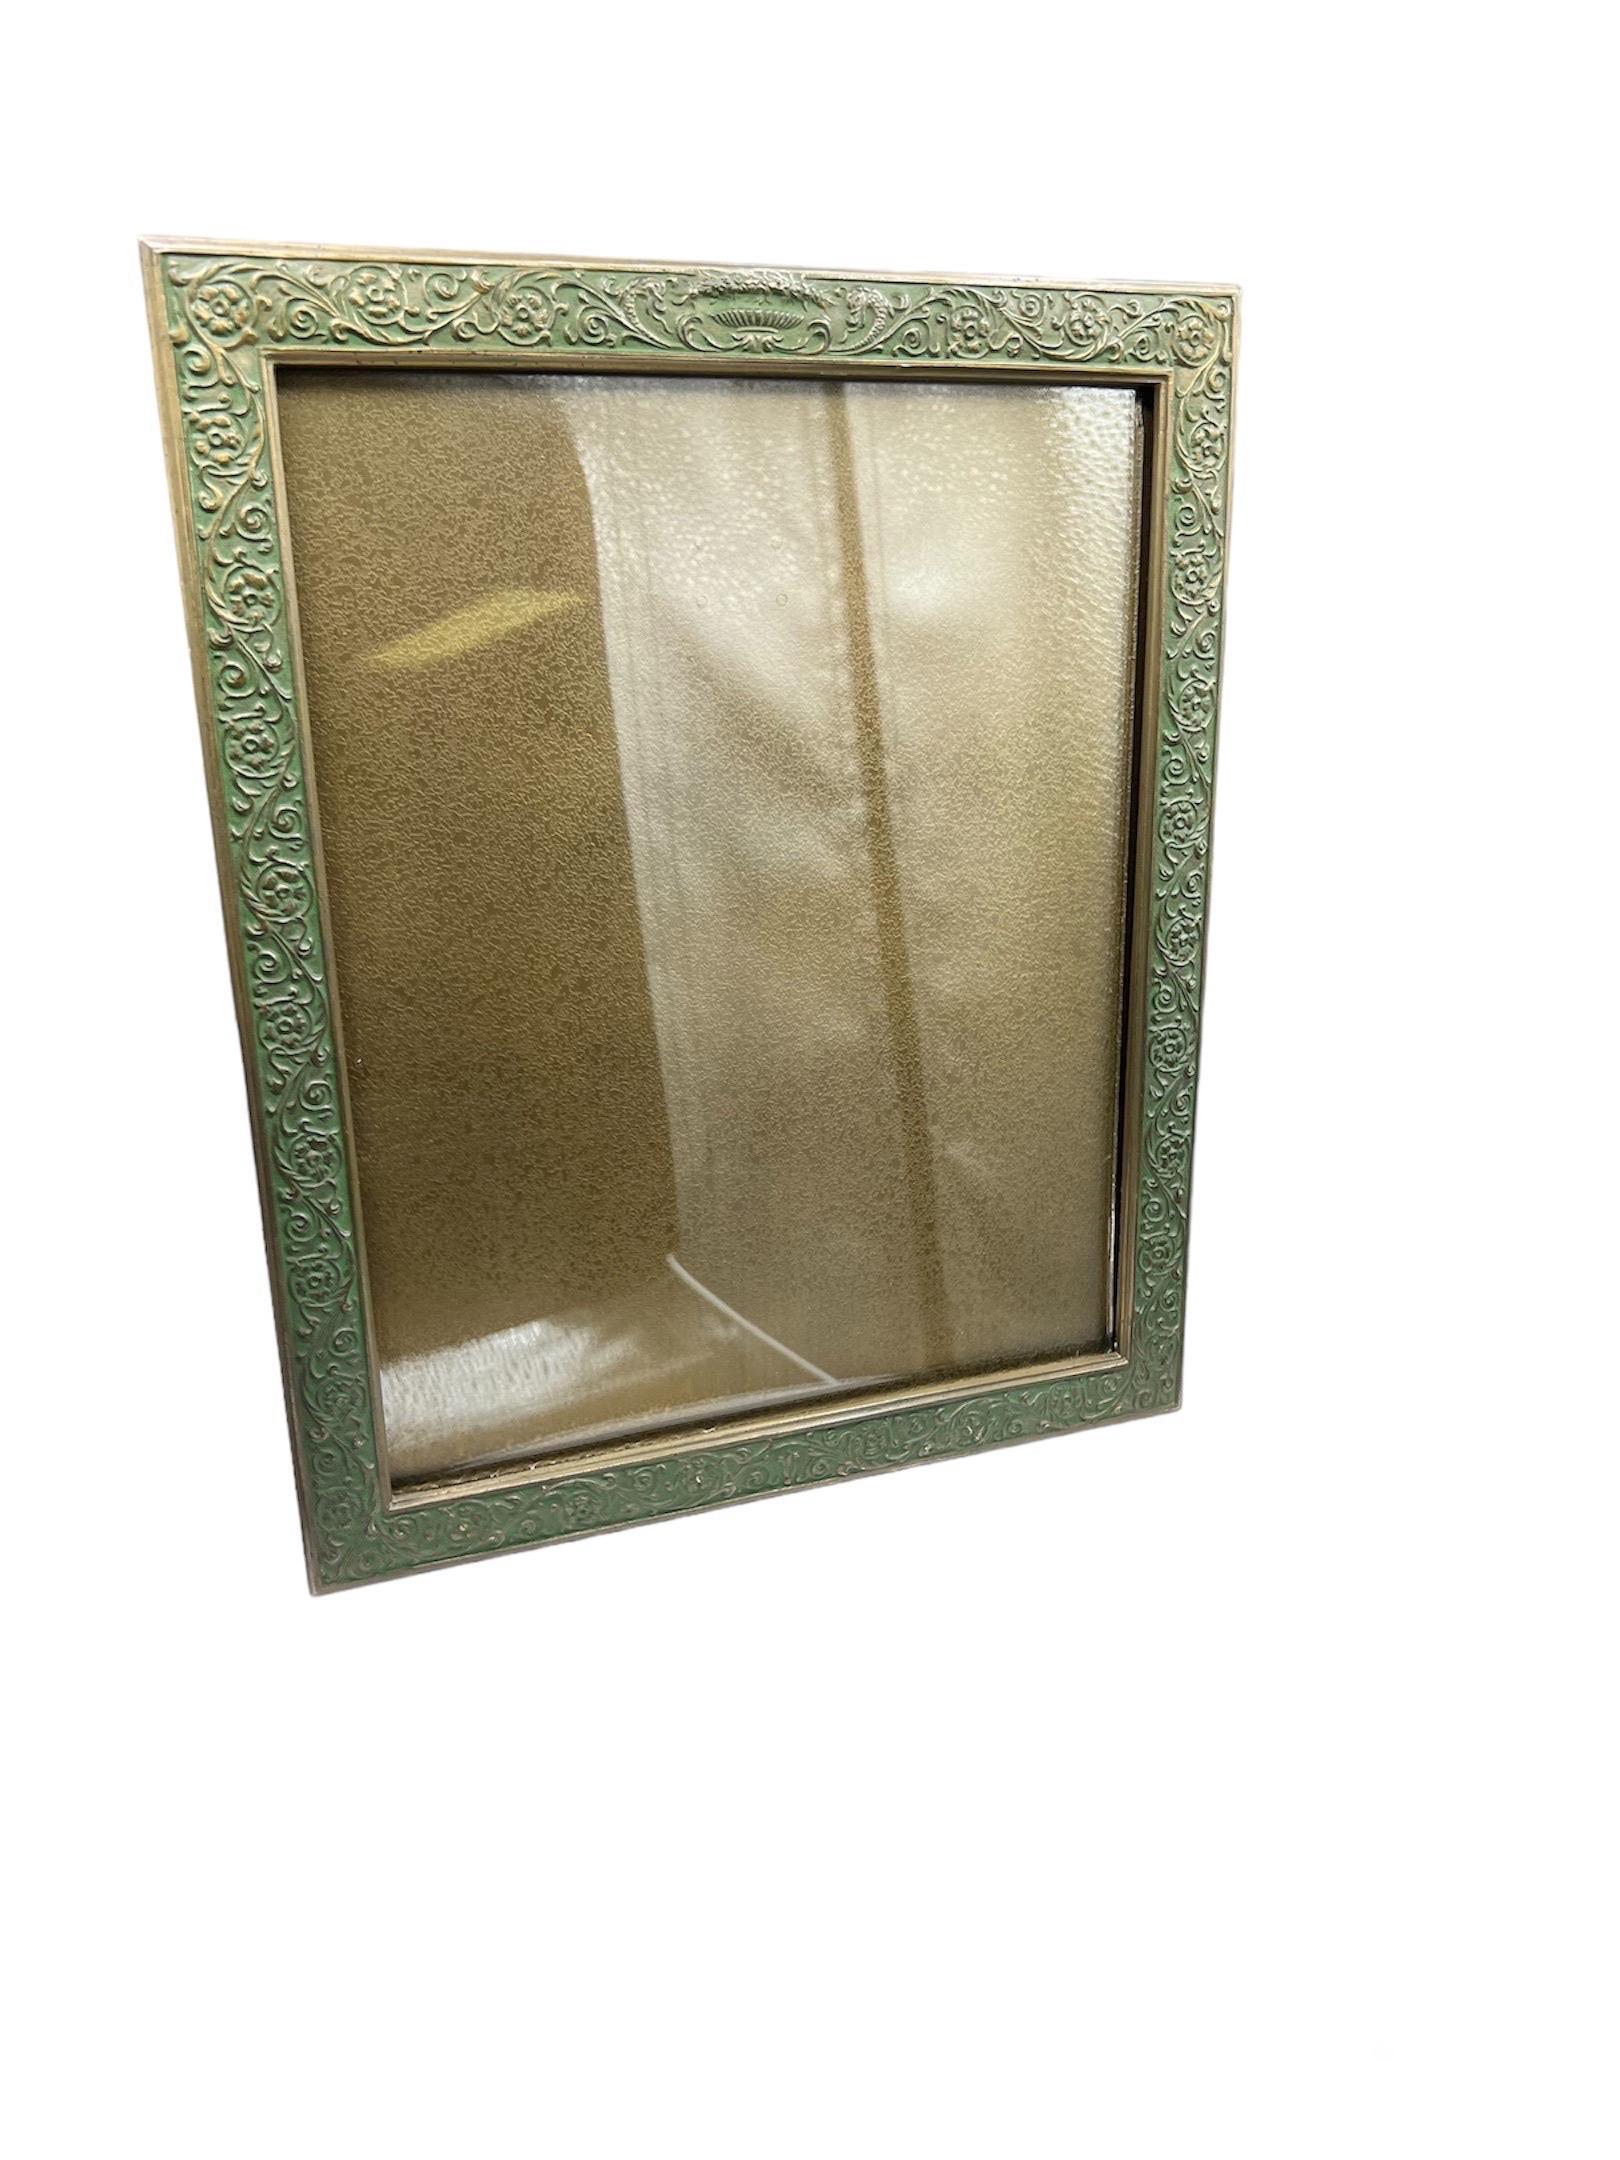 Gilt Tiffany Studios gilt-bronze picture frame, Stamped Tiffany Studios/NY/1611. For Sale